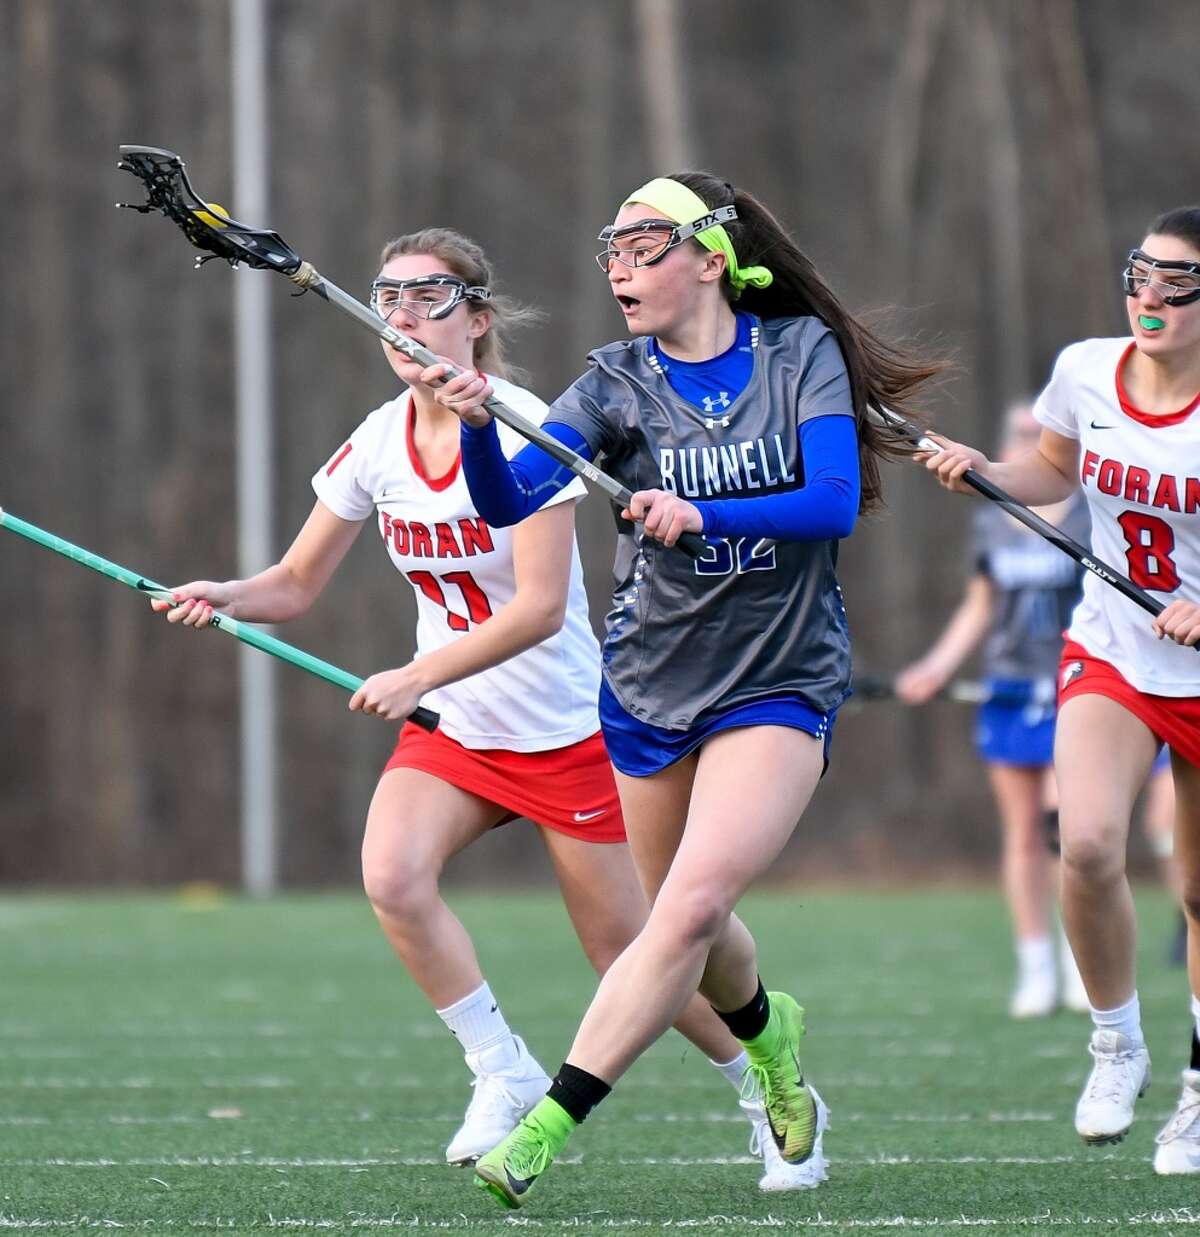 Bunnell’s Holly Rosa brings the ball into the attack zone.